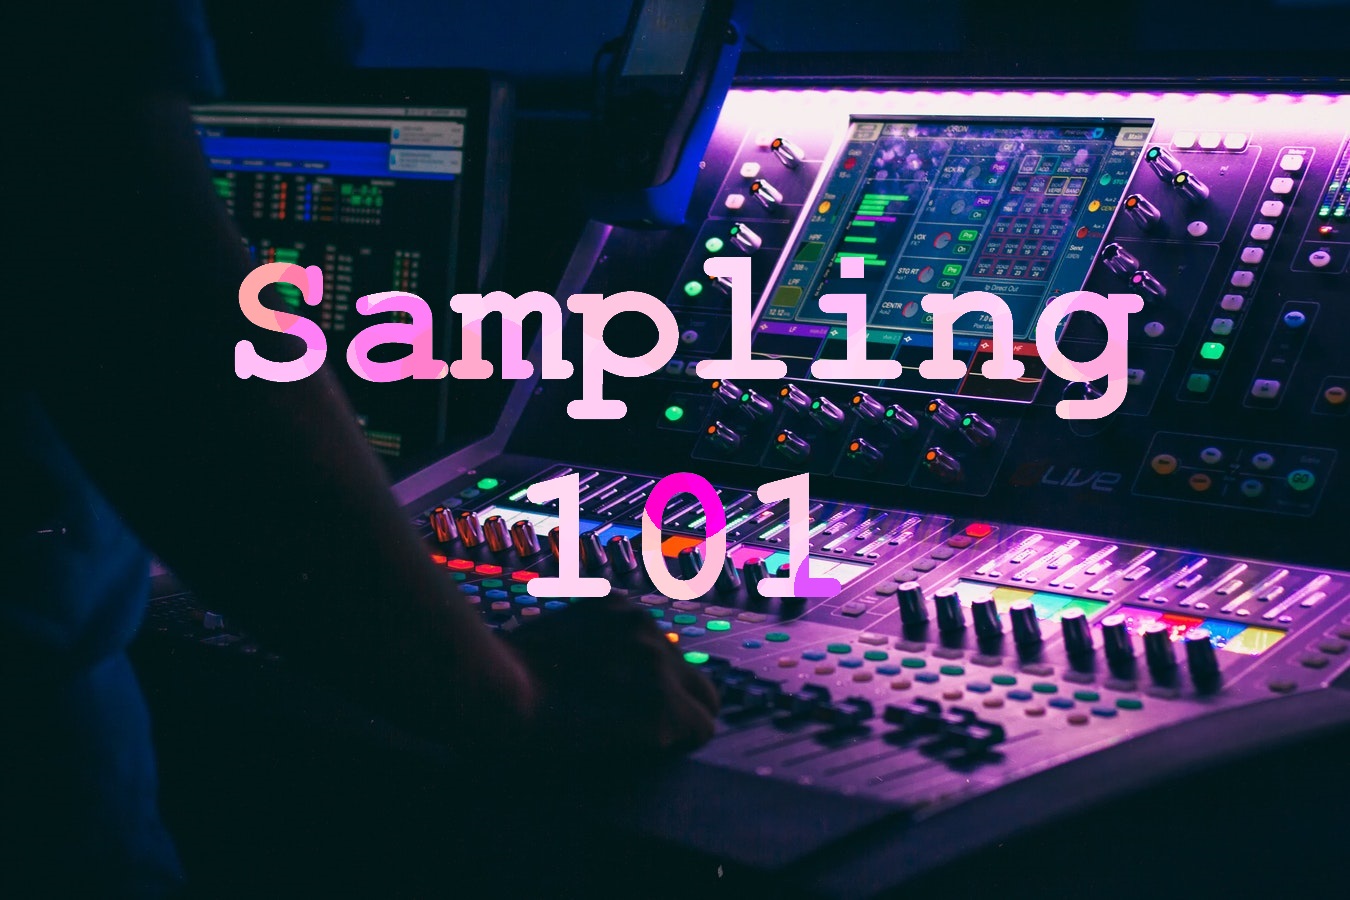 How to legally use music samples in your tracks